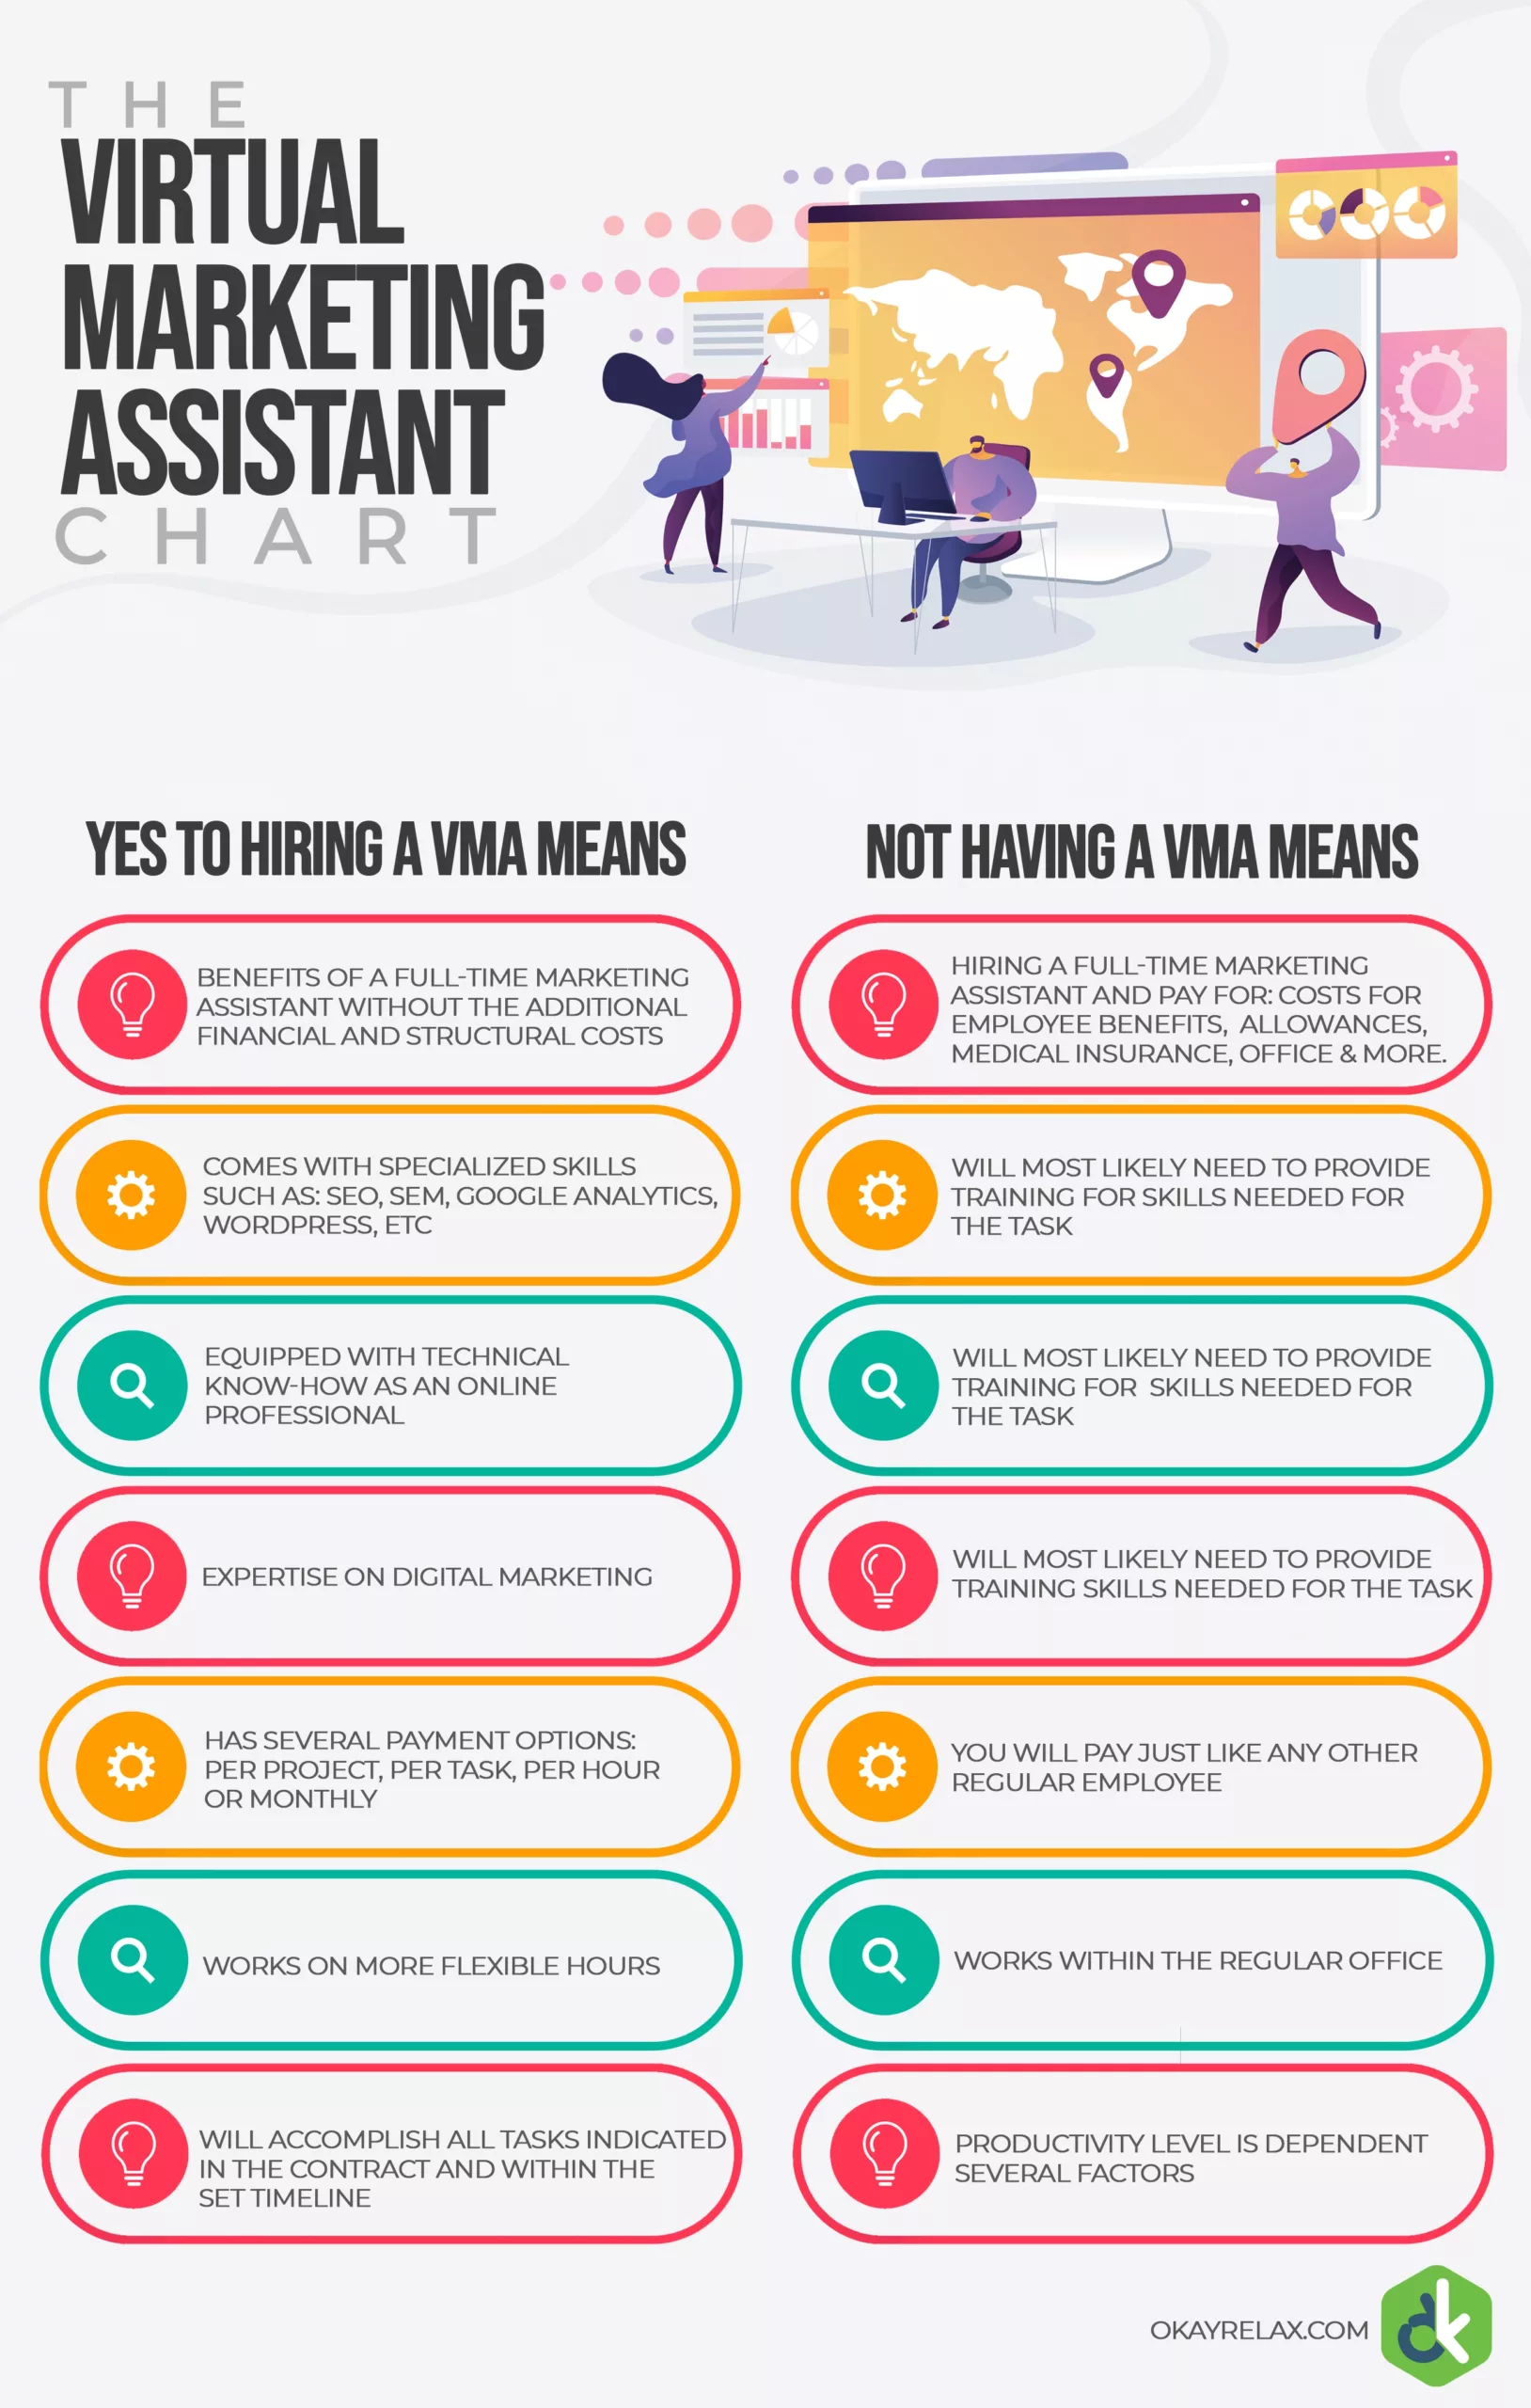 A chart designed in different colors mentioning the benefits of hiring a VMA and cost of not hiring a VMA. The chart is titled: "The Virtual Marketing Assistant Chart"